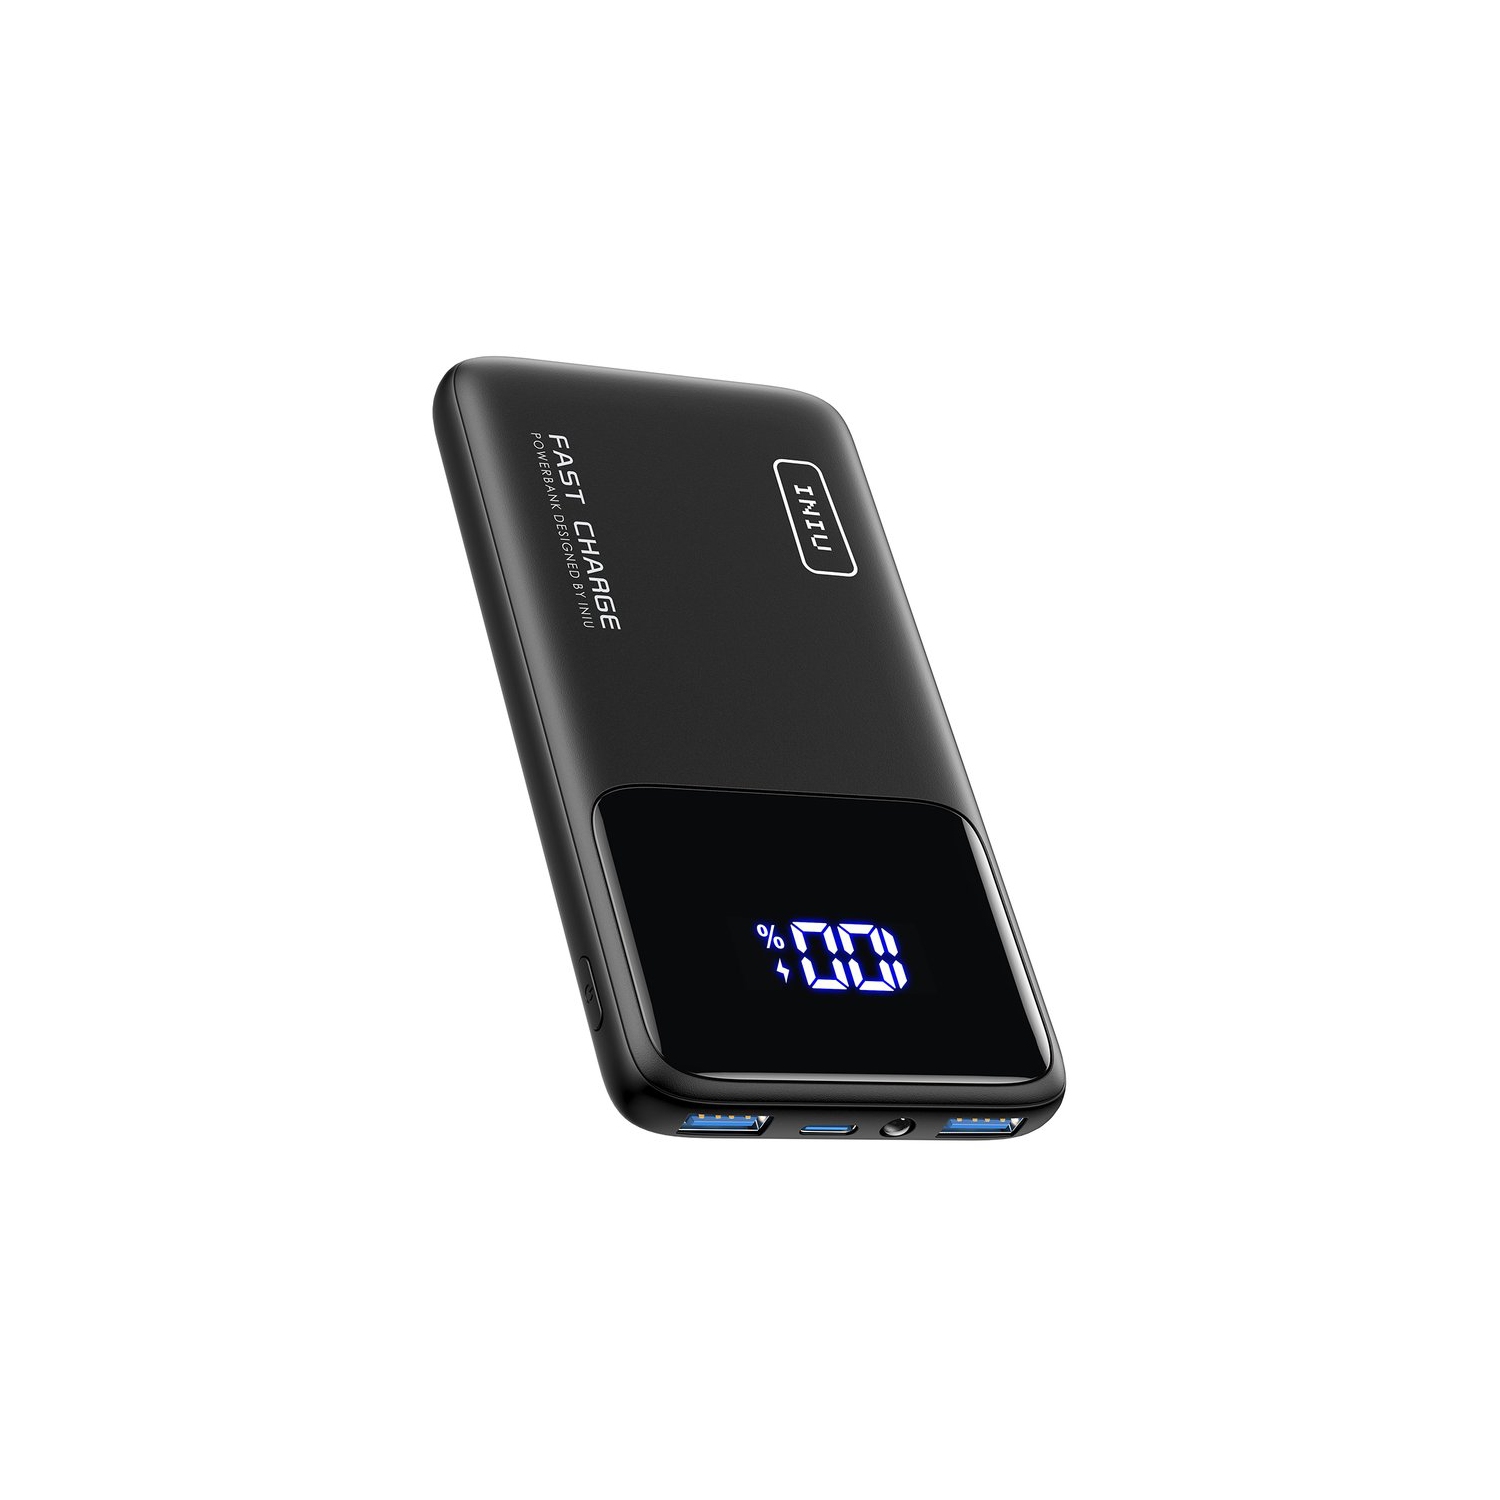 INIU Slimmest Power Bank 10000mAh 22.5W Fast Charging Portable Charger with Digital Display USB C in & Out Battery Pack for iPhone, Samsung and More - Black